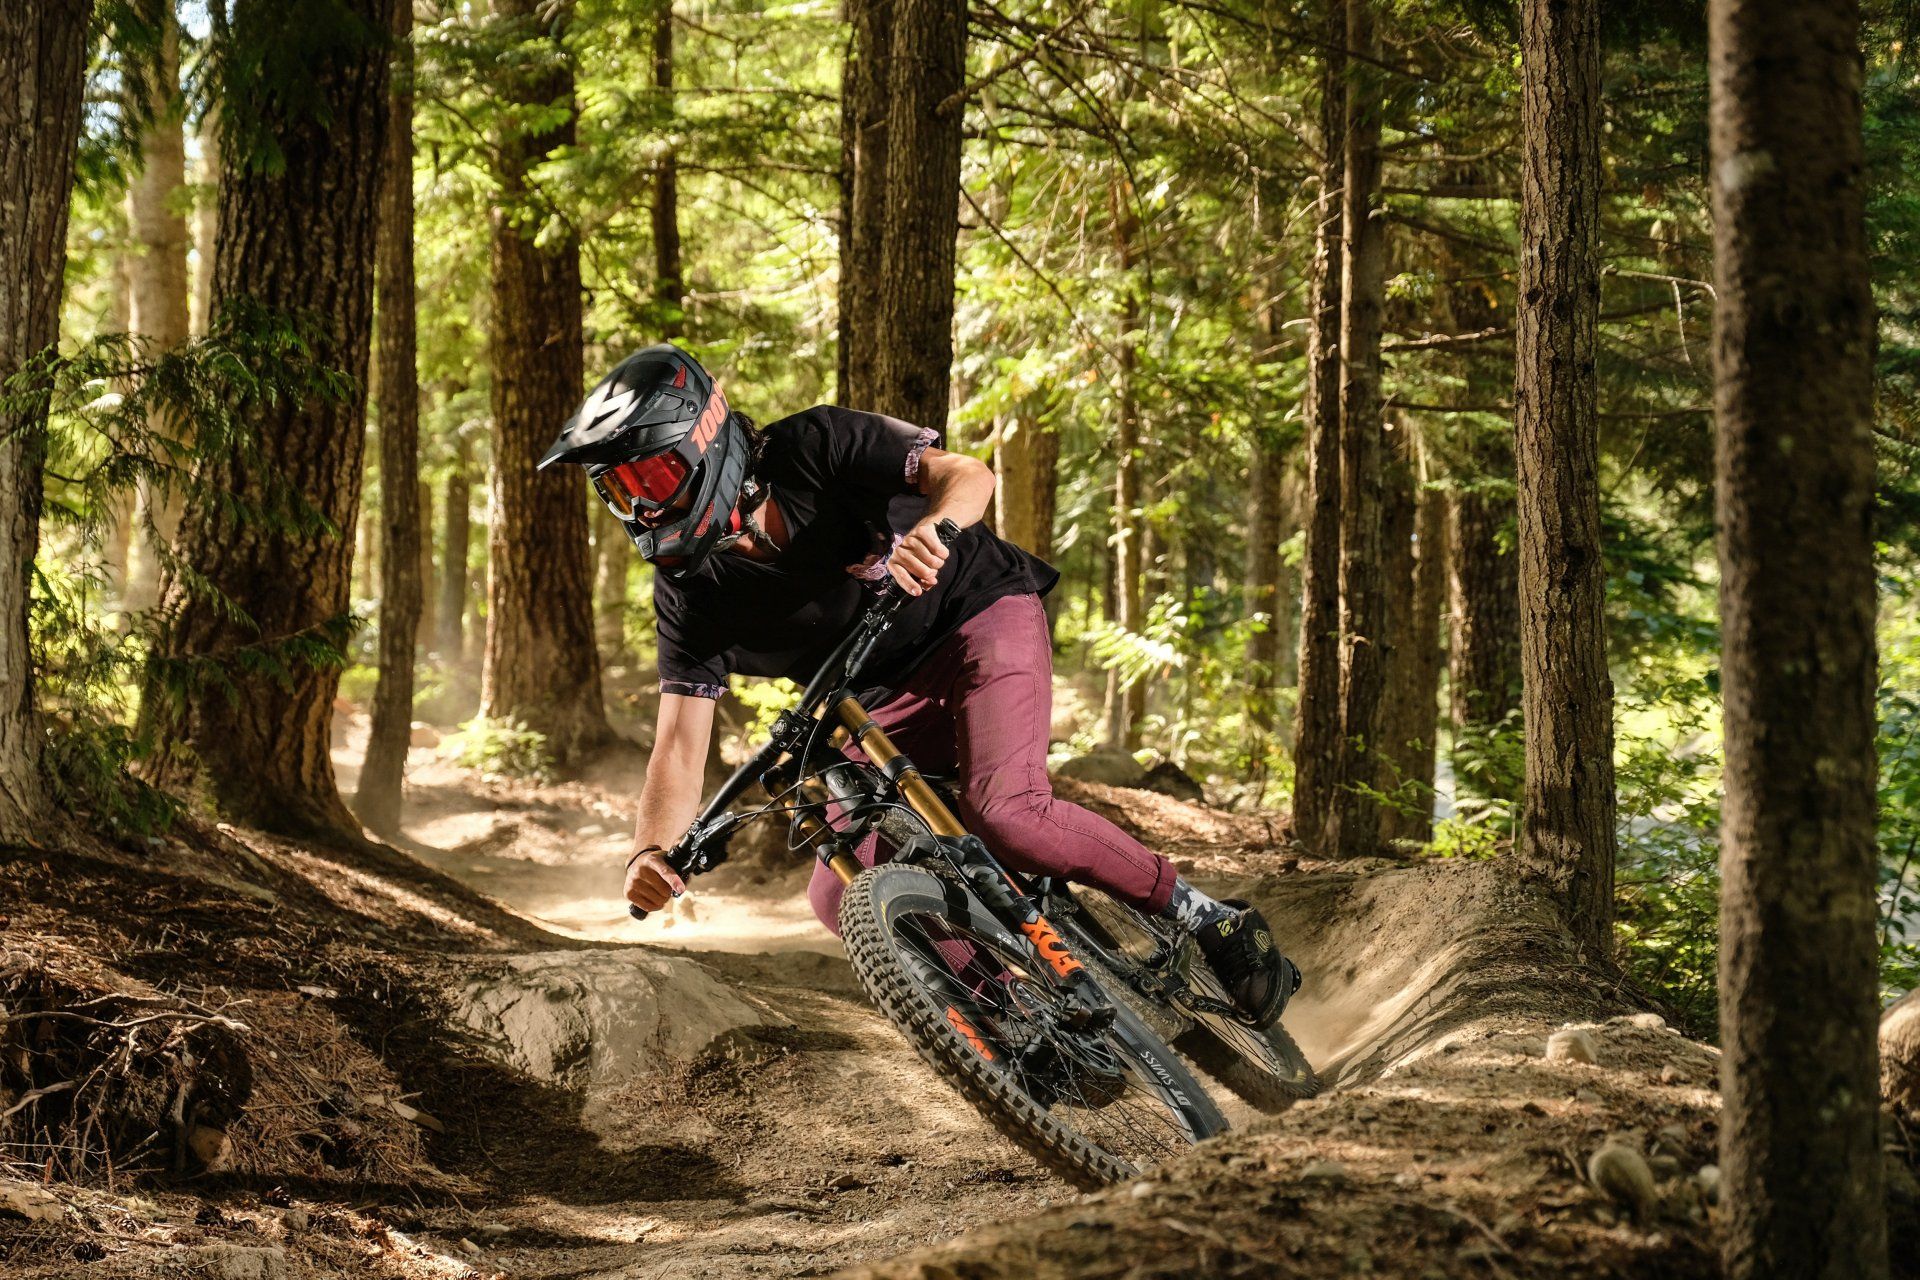 An image of a BMX in the forest